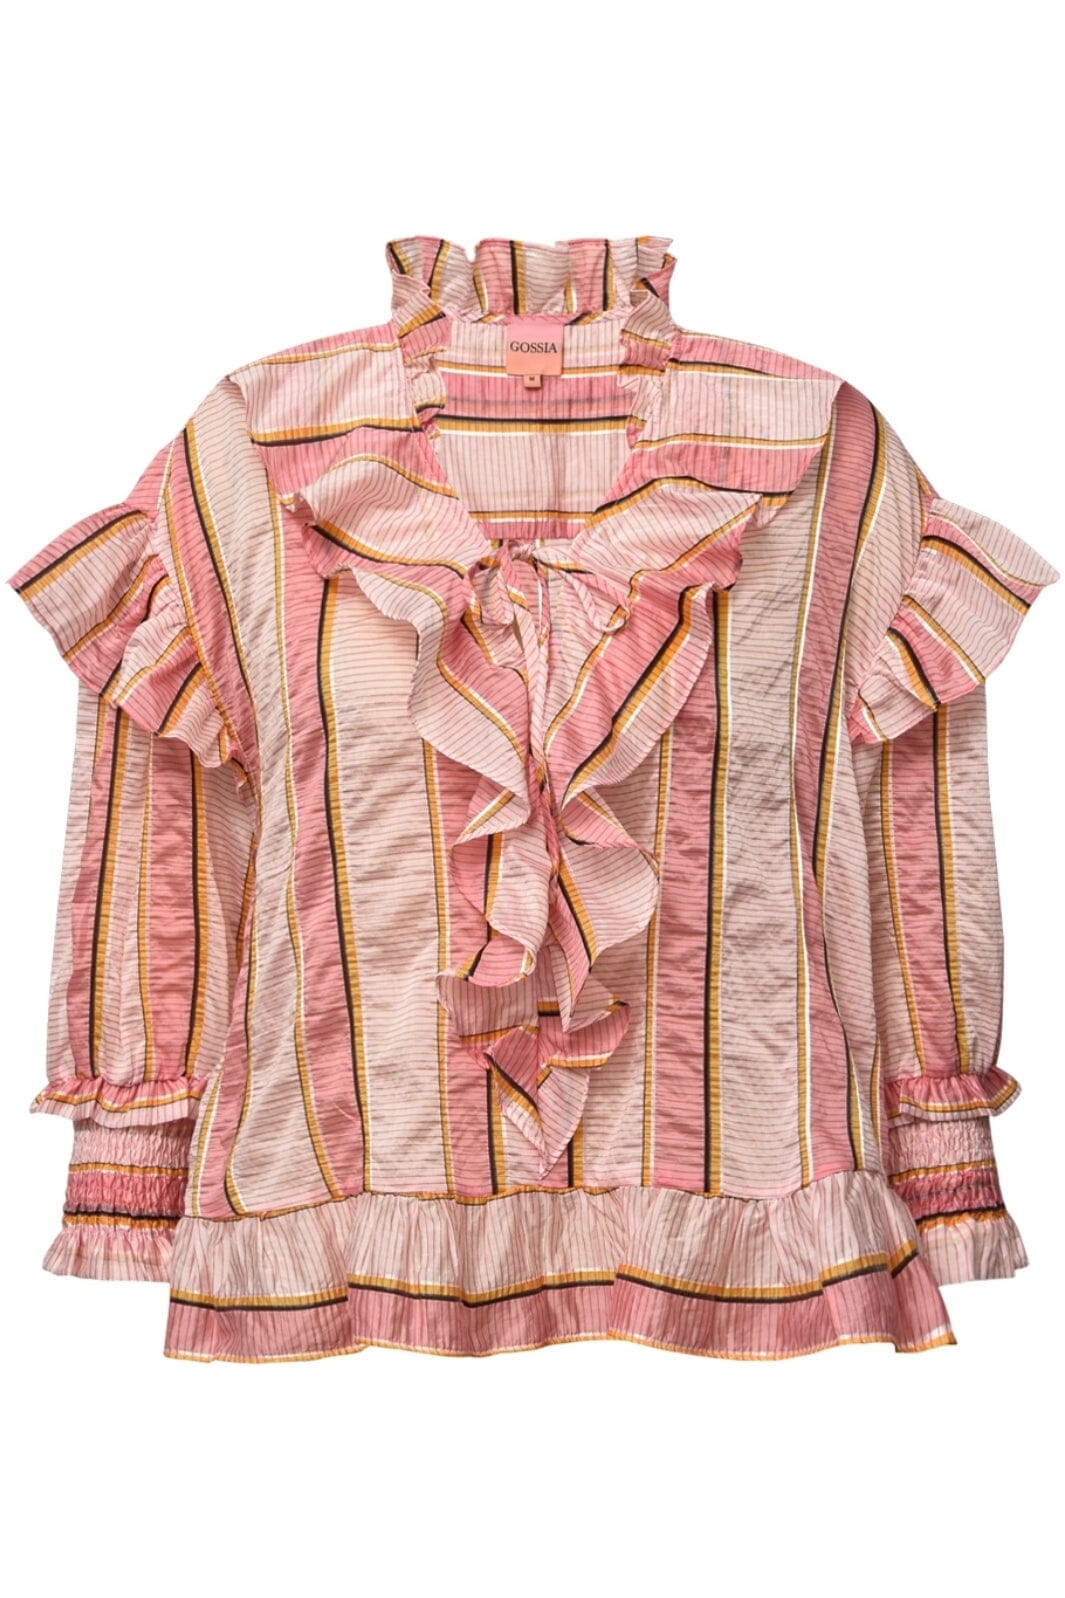 Gossia - NinneGO Blouse - Pink Mix Bluser 